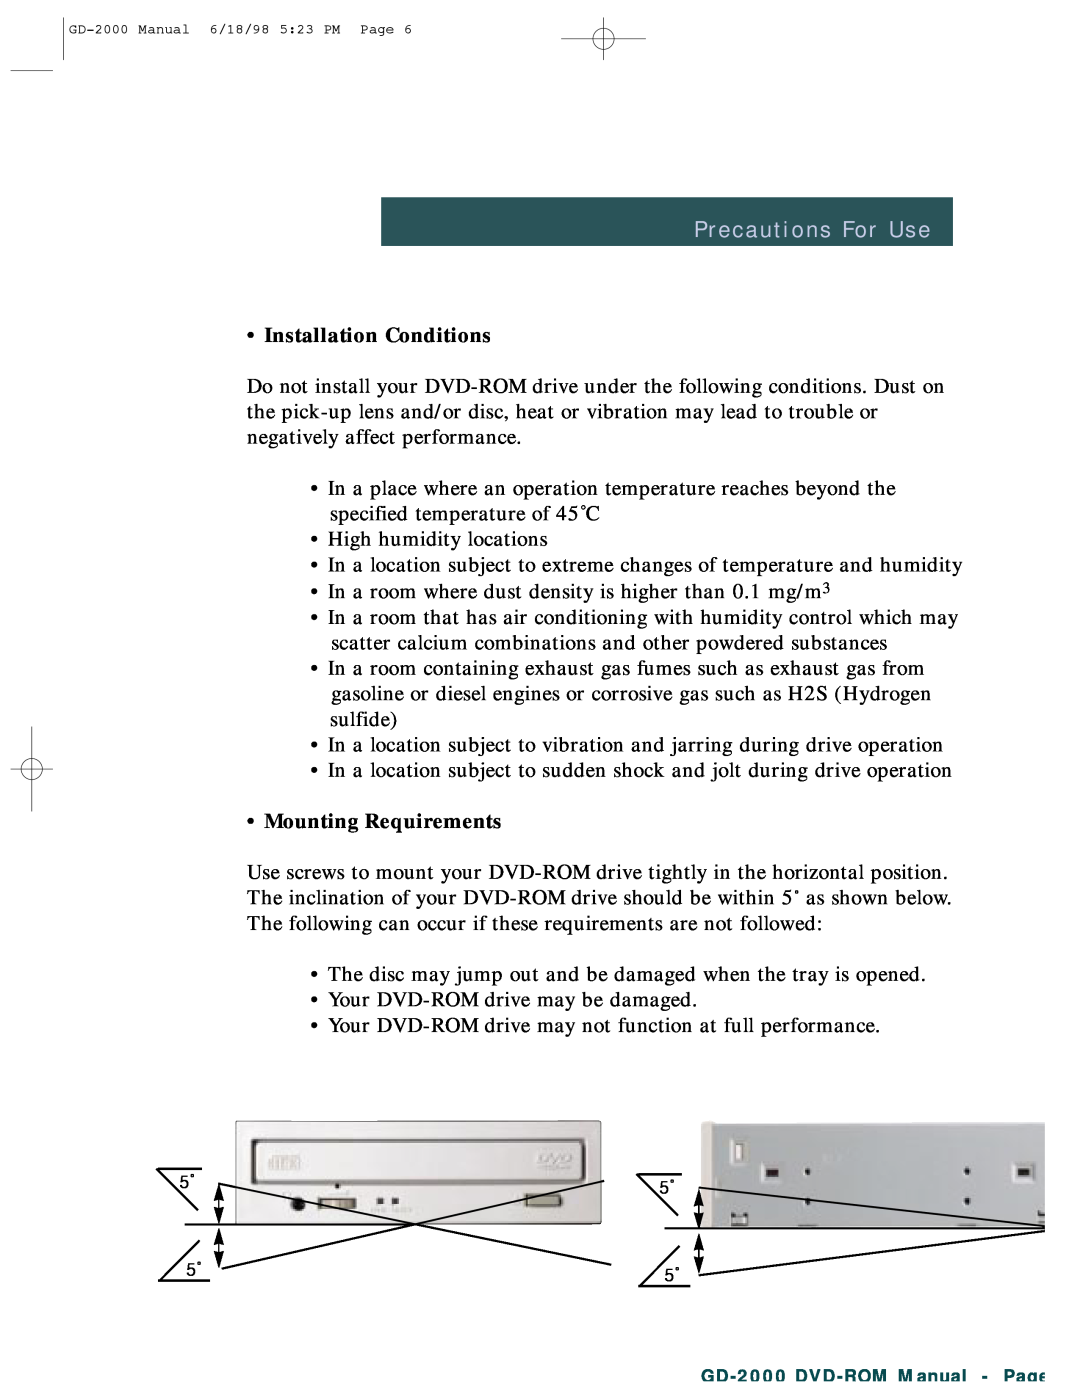 Hitachi GD-2000 manual Precautions For Use, Installation Conditions, Mounting Requirements 